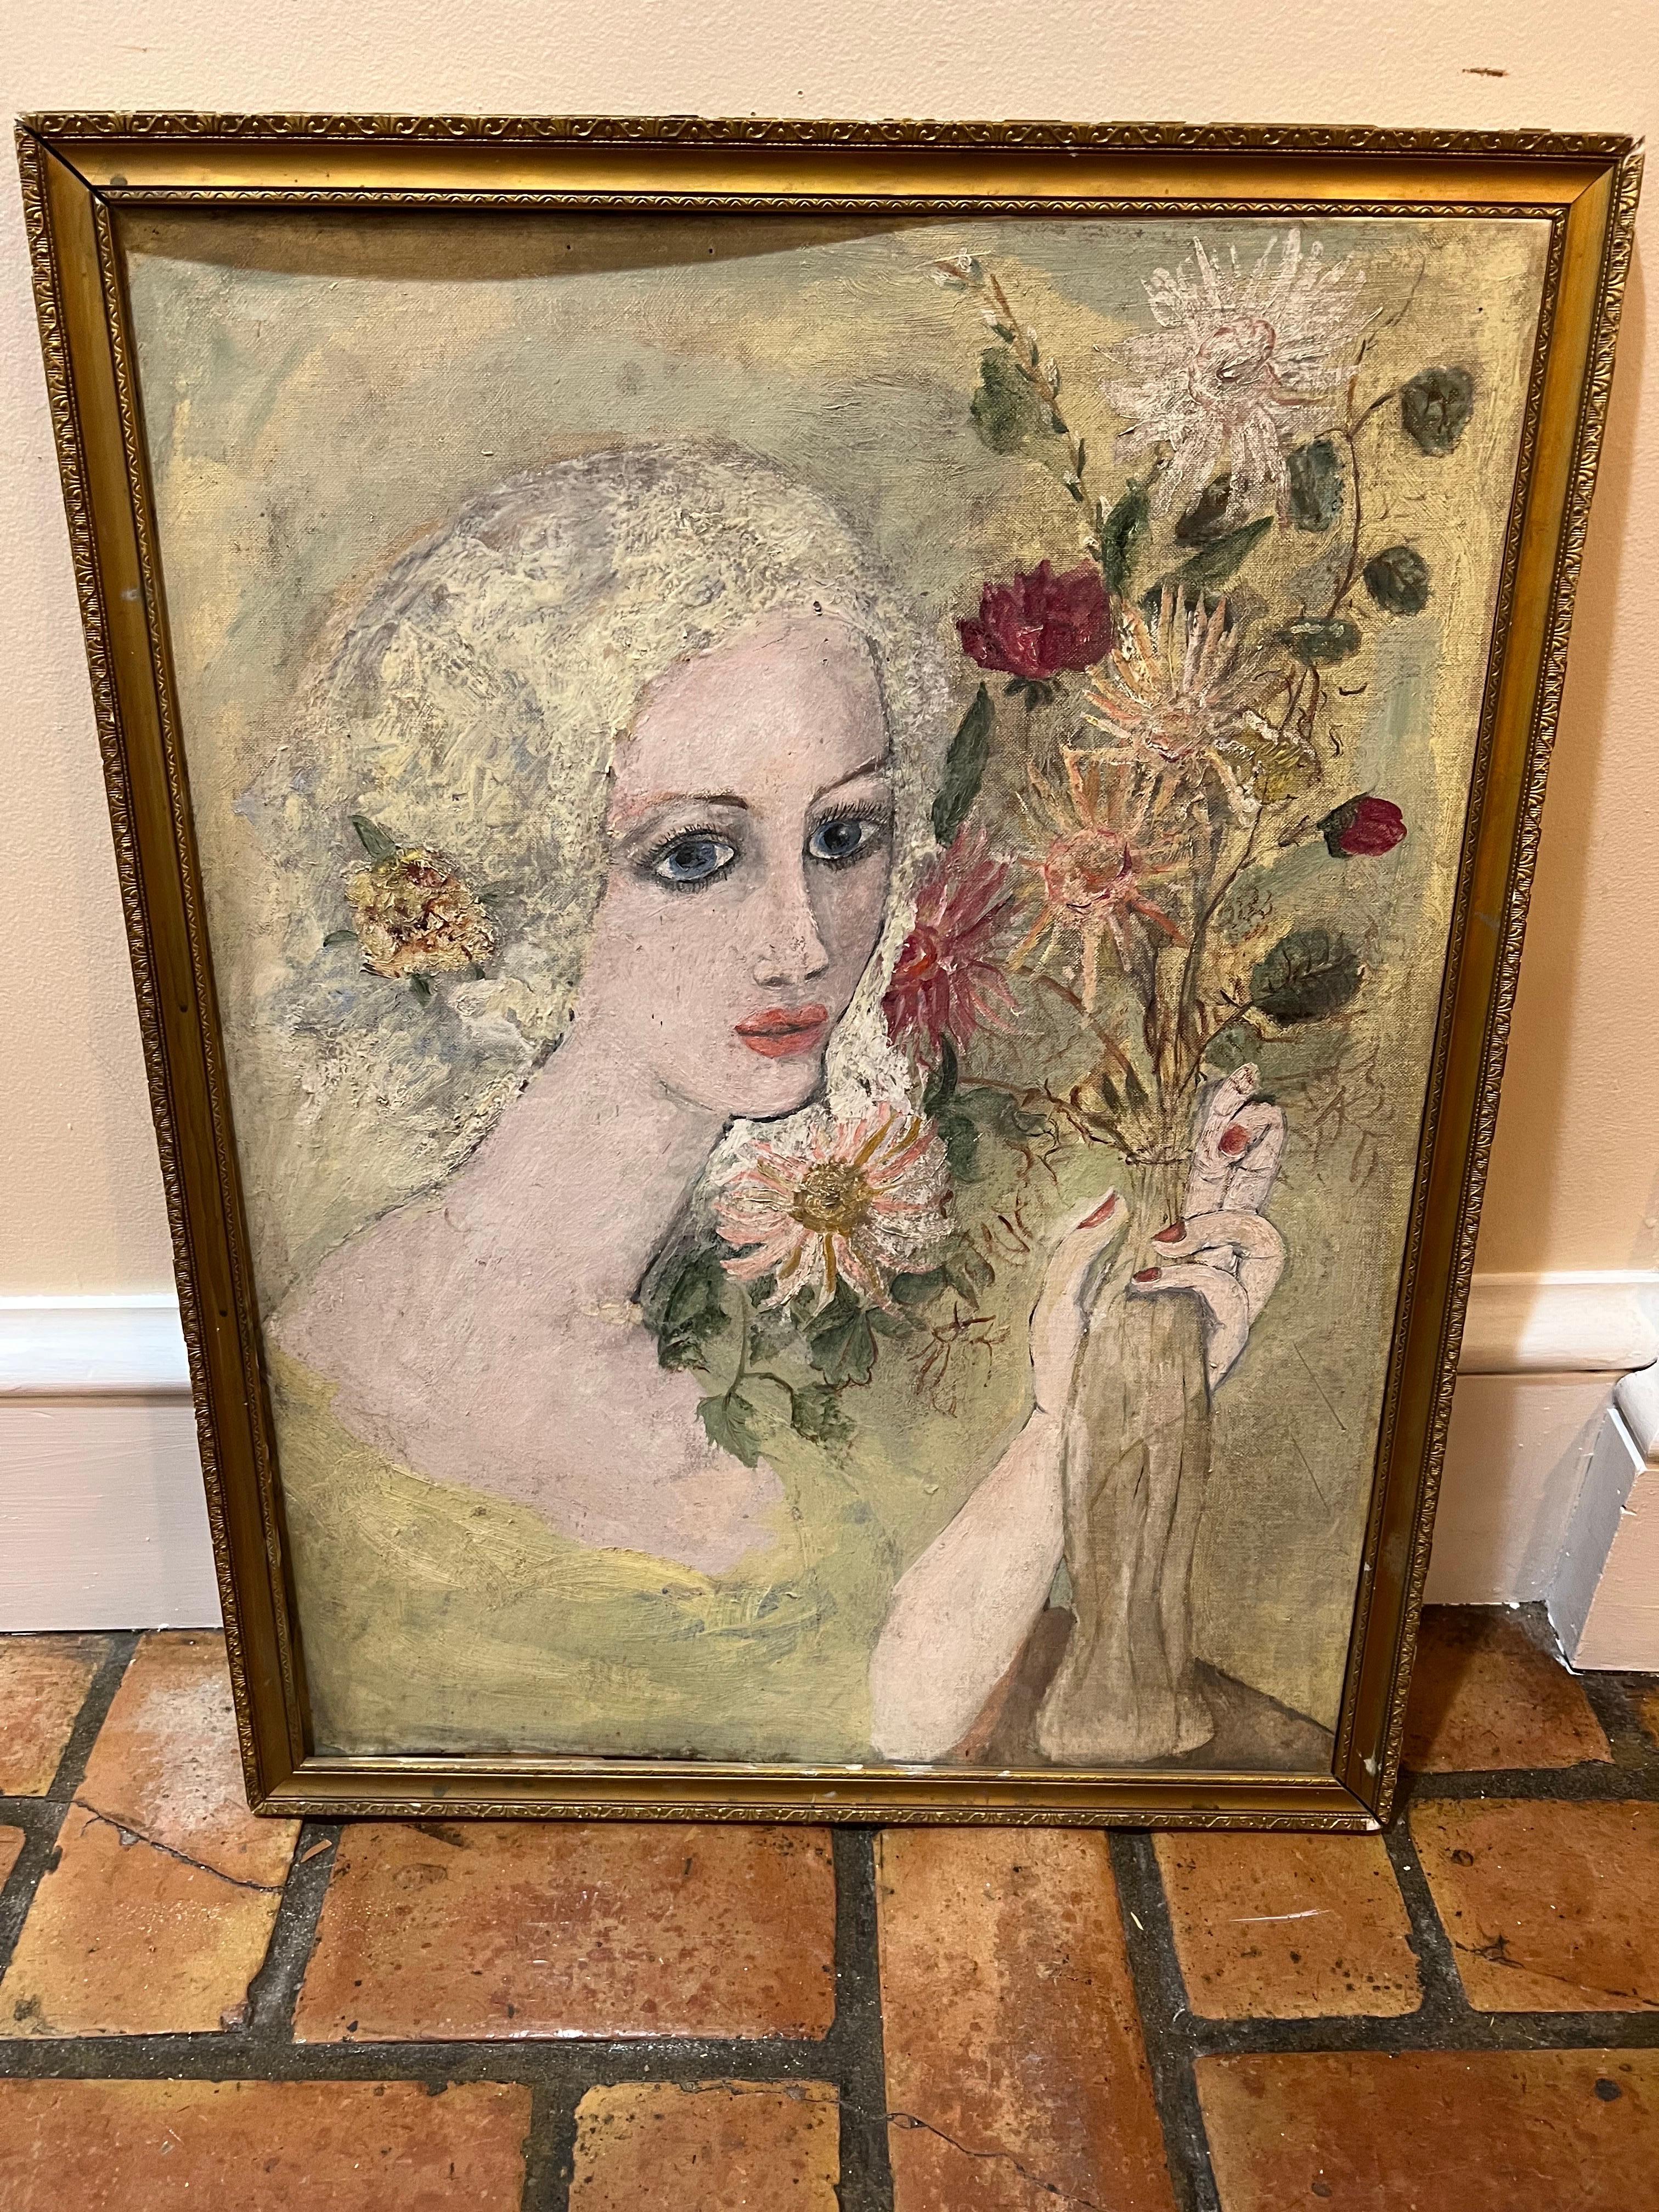 Romantic Signed Painting of a Woman with Flowers by Julie v. Cross